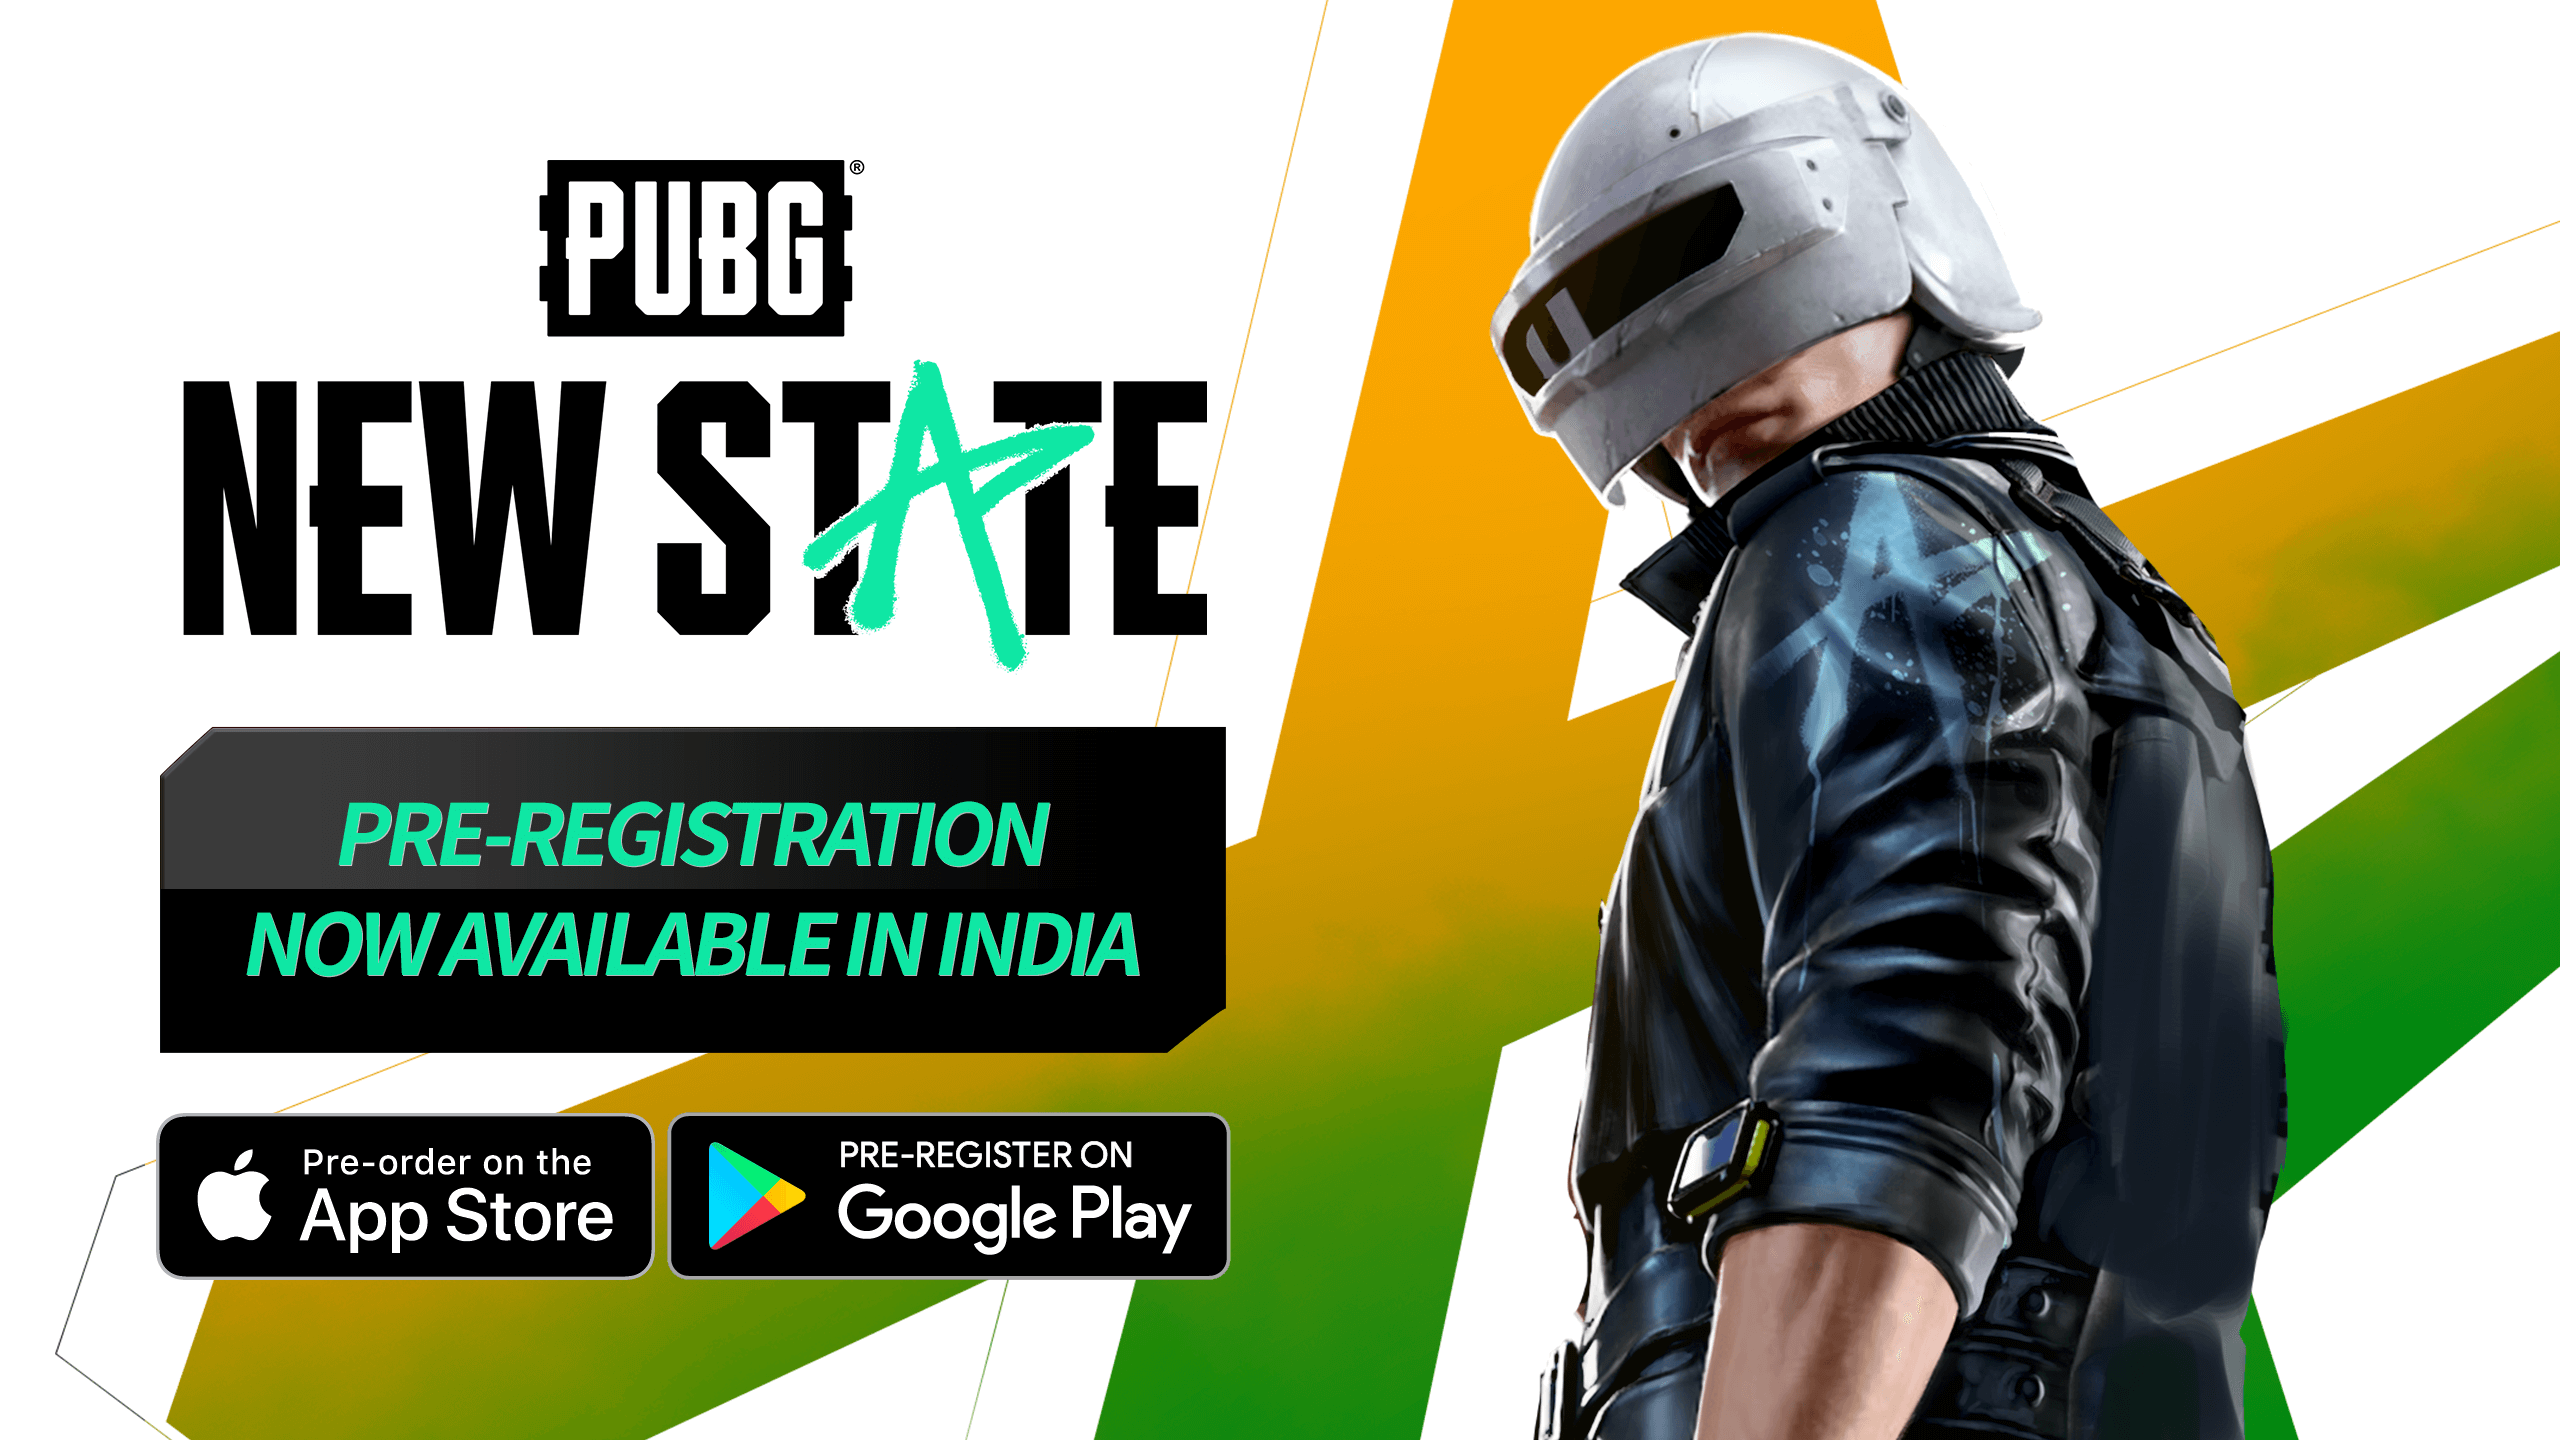 PUBG: NEW STATE Is Coming to India!